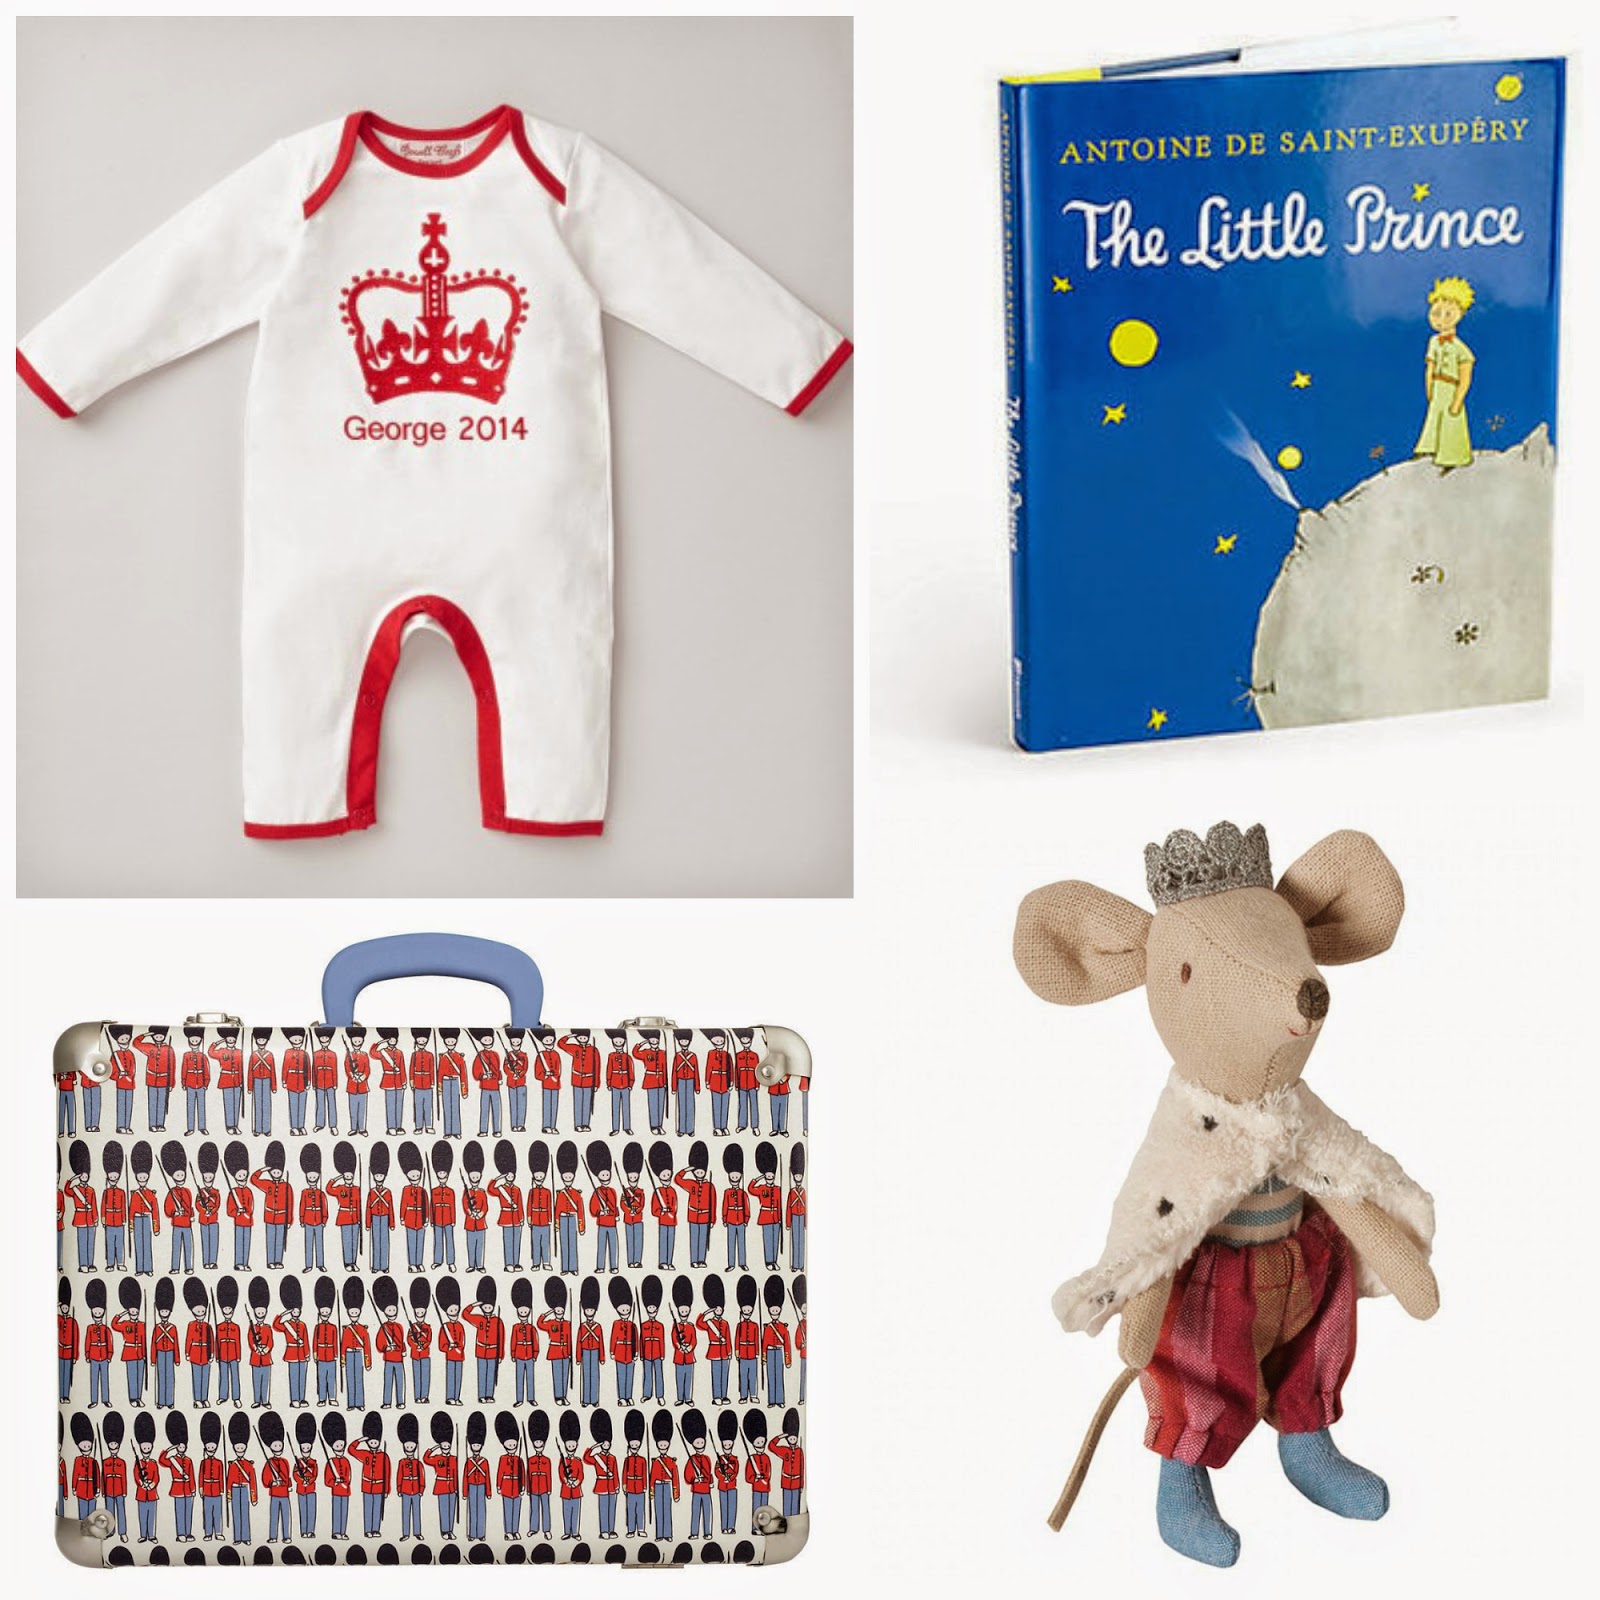 Brilliant 1st Birthday gifts fit for a Little Prince…| prince george | kate middleton | prince william | royal baby | 1st birthday | first birthday | royal birthday | prince georges birthday | birthday gifts | 1st birthday party | gifts for boys | early learning centre happy birthday george | george royal baby | william and kate | birthday party | mamasvib